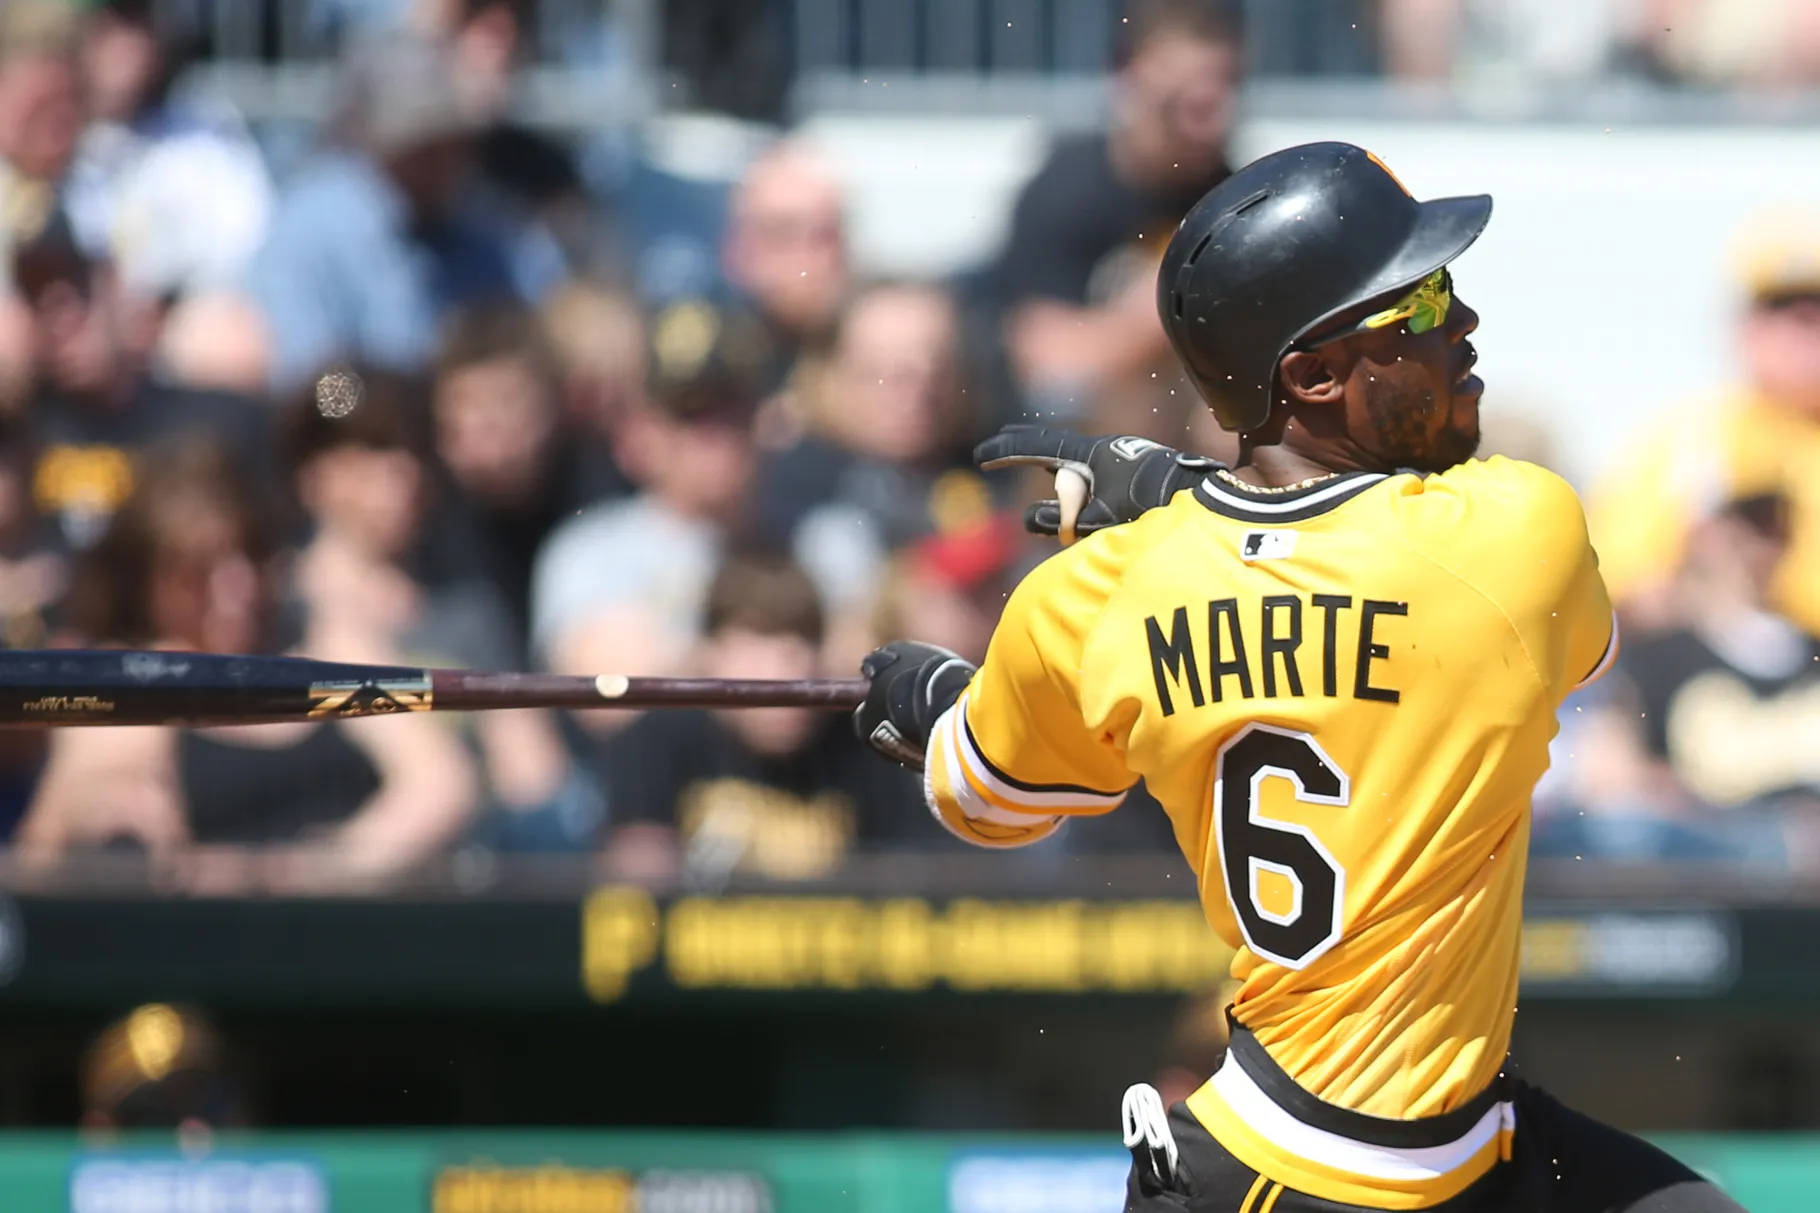 Download Starling Marte In Yellow Jersey Wallpaper